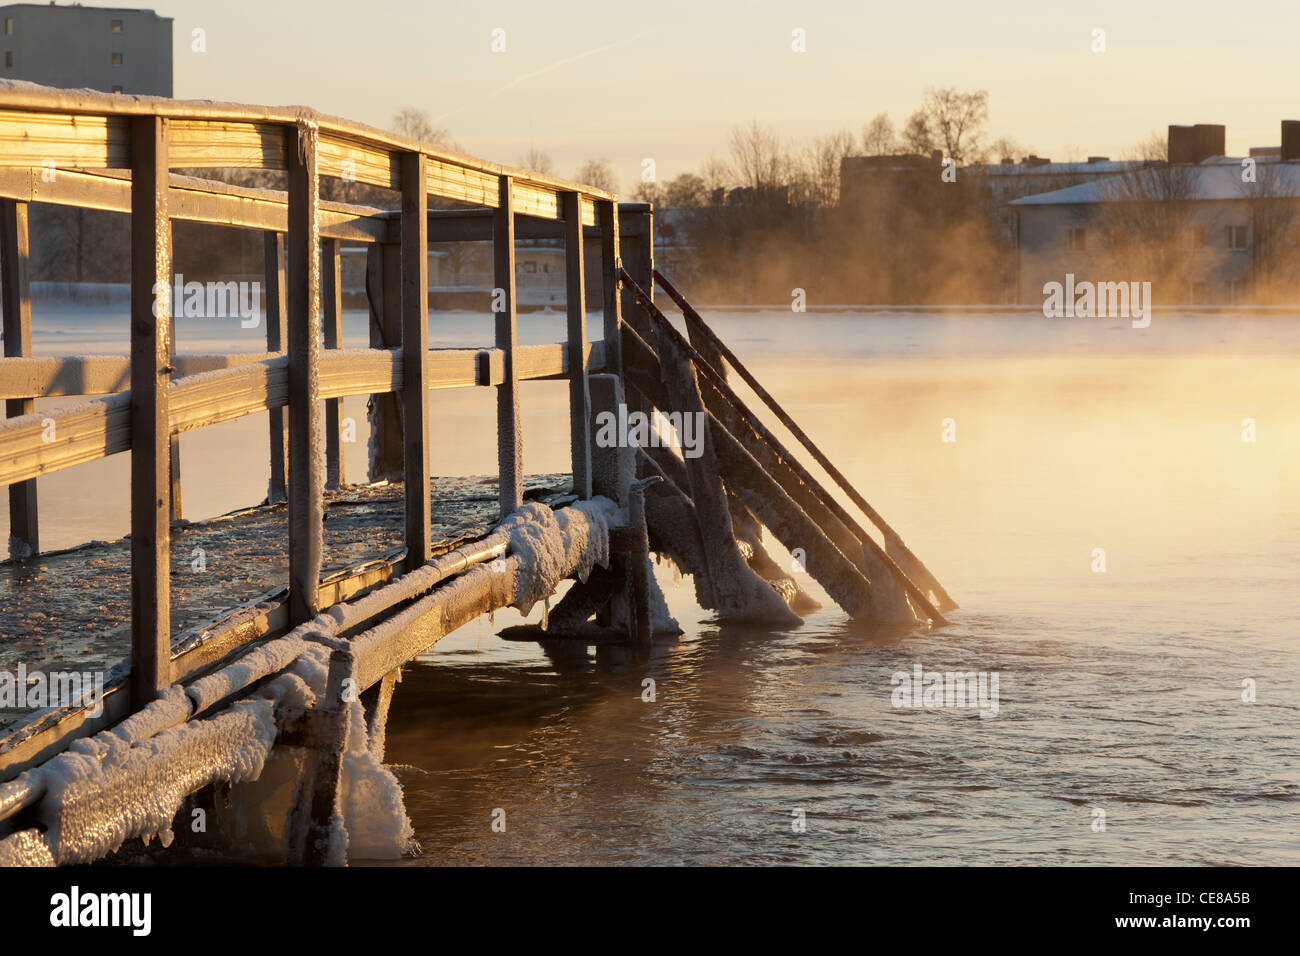 The winter swimming dock in wintertime when sun is shining and weather is about -20 degrees Celsius by the river Oulujoki Stock Photo